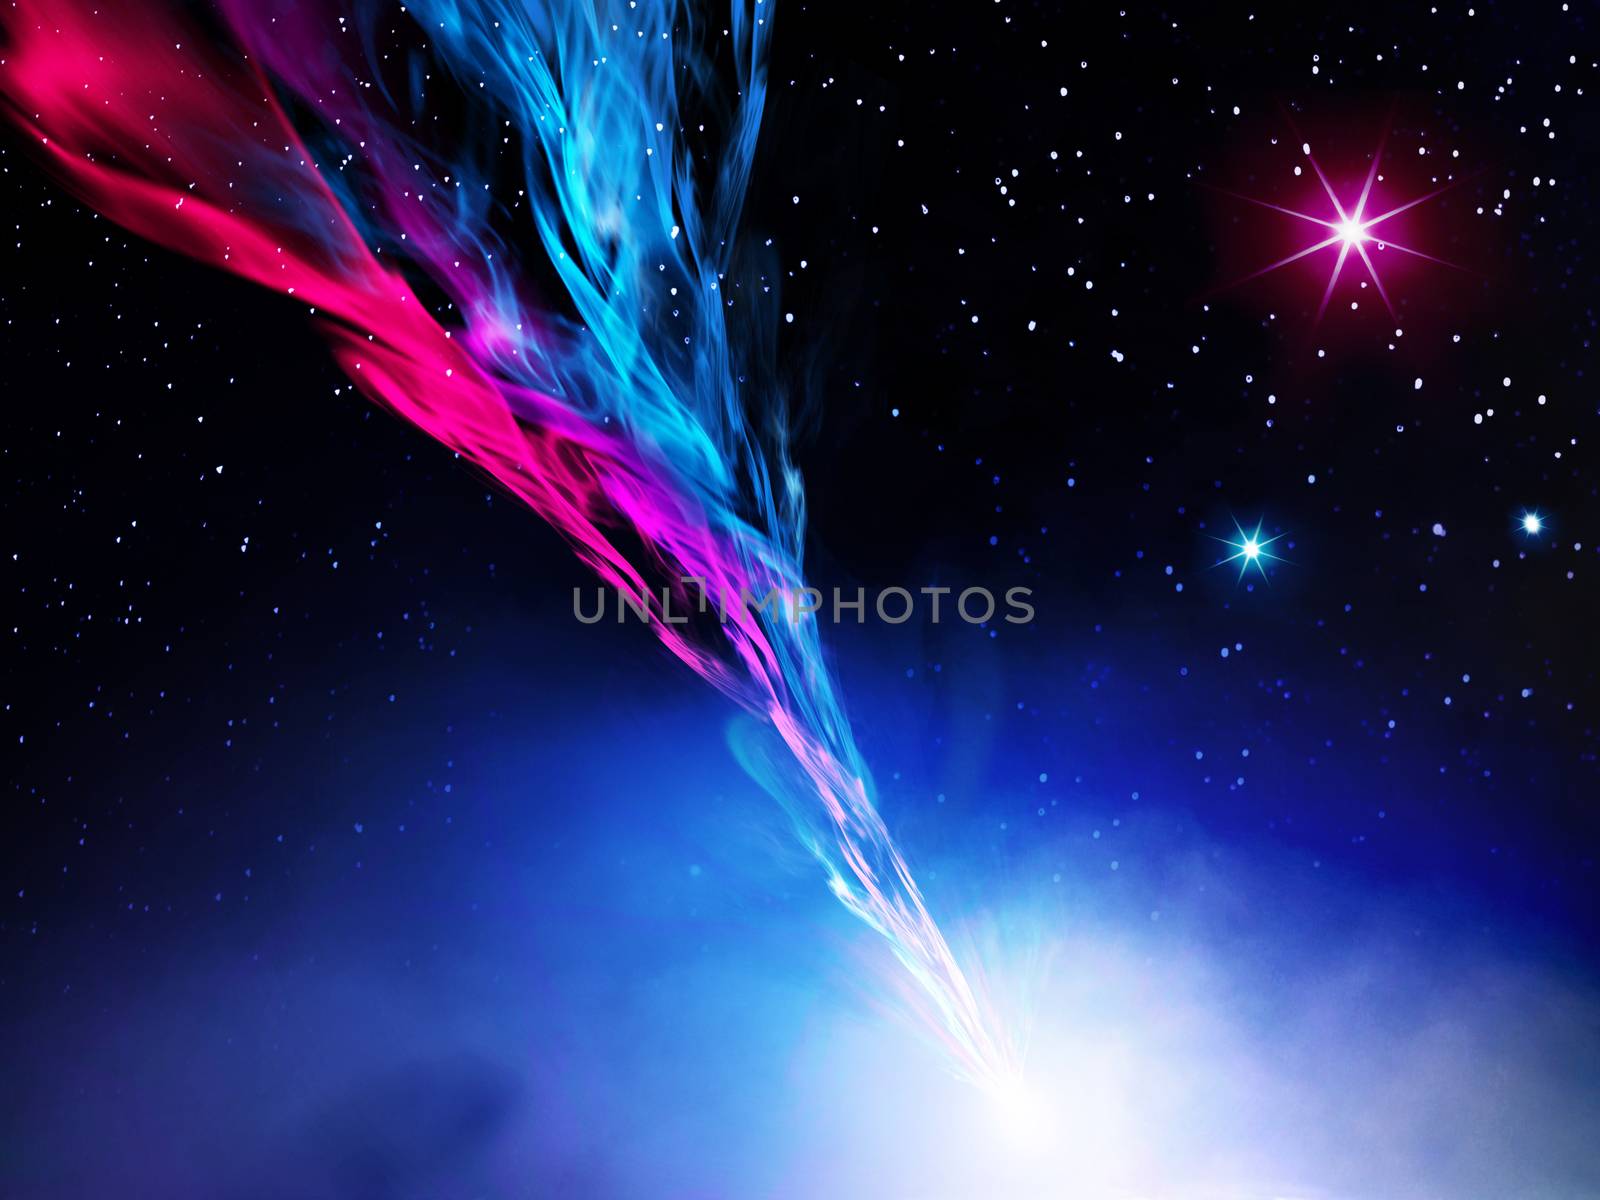 illustration of nebula in space by ssuaphoto